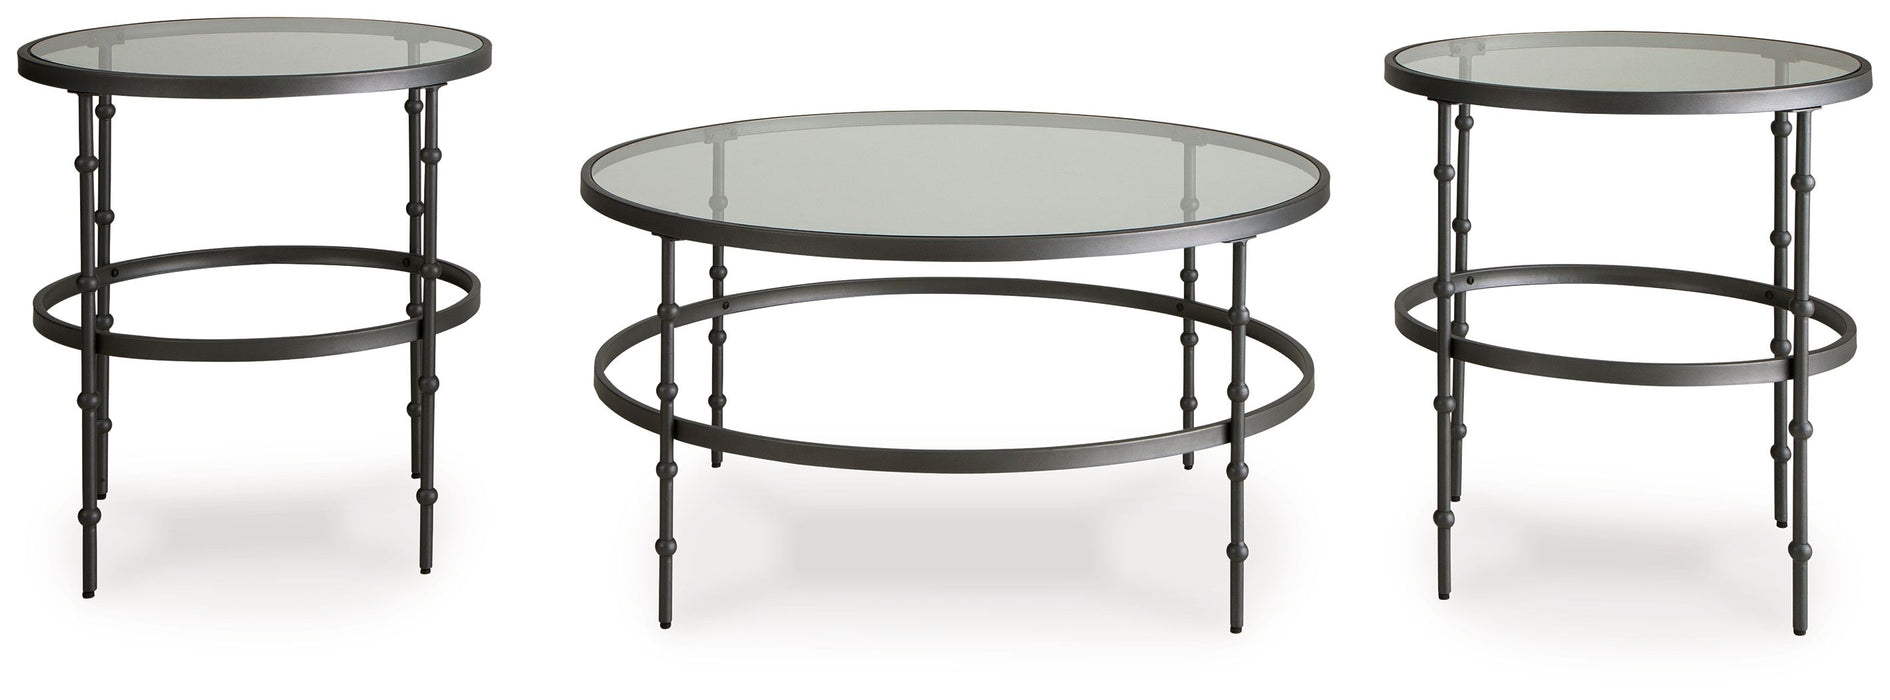 Kellyco - Gunmetal - Occasional Table Set (Set of 3) Capital Discount Furniture Home Furniture, Furniture Store